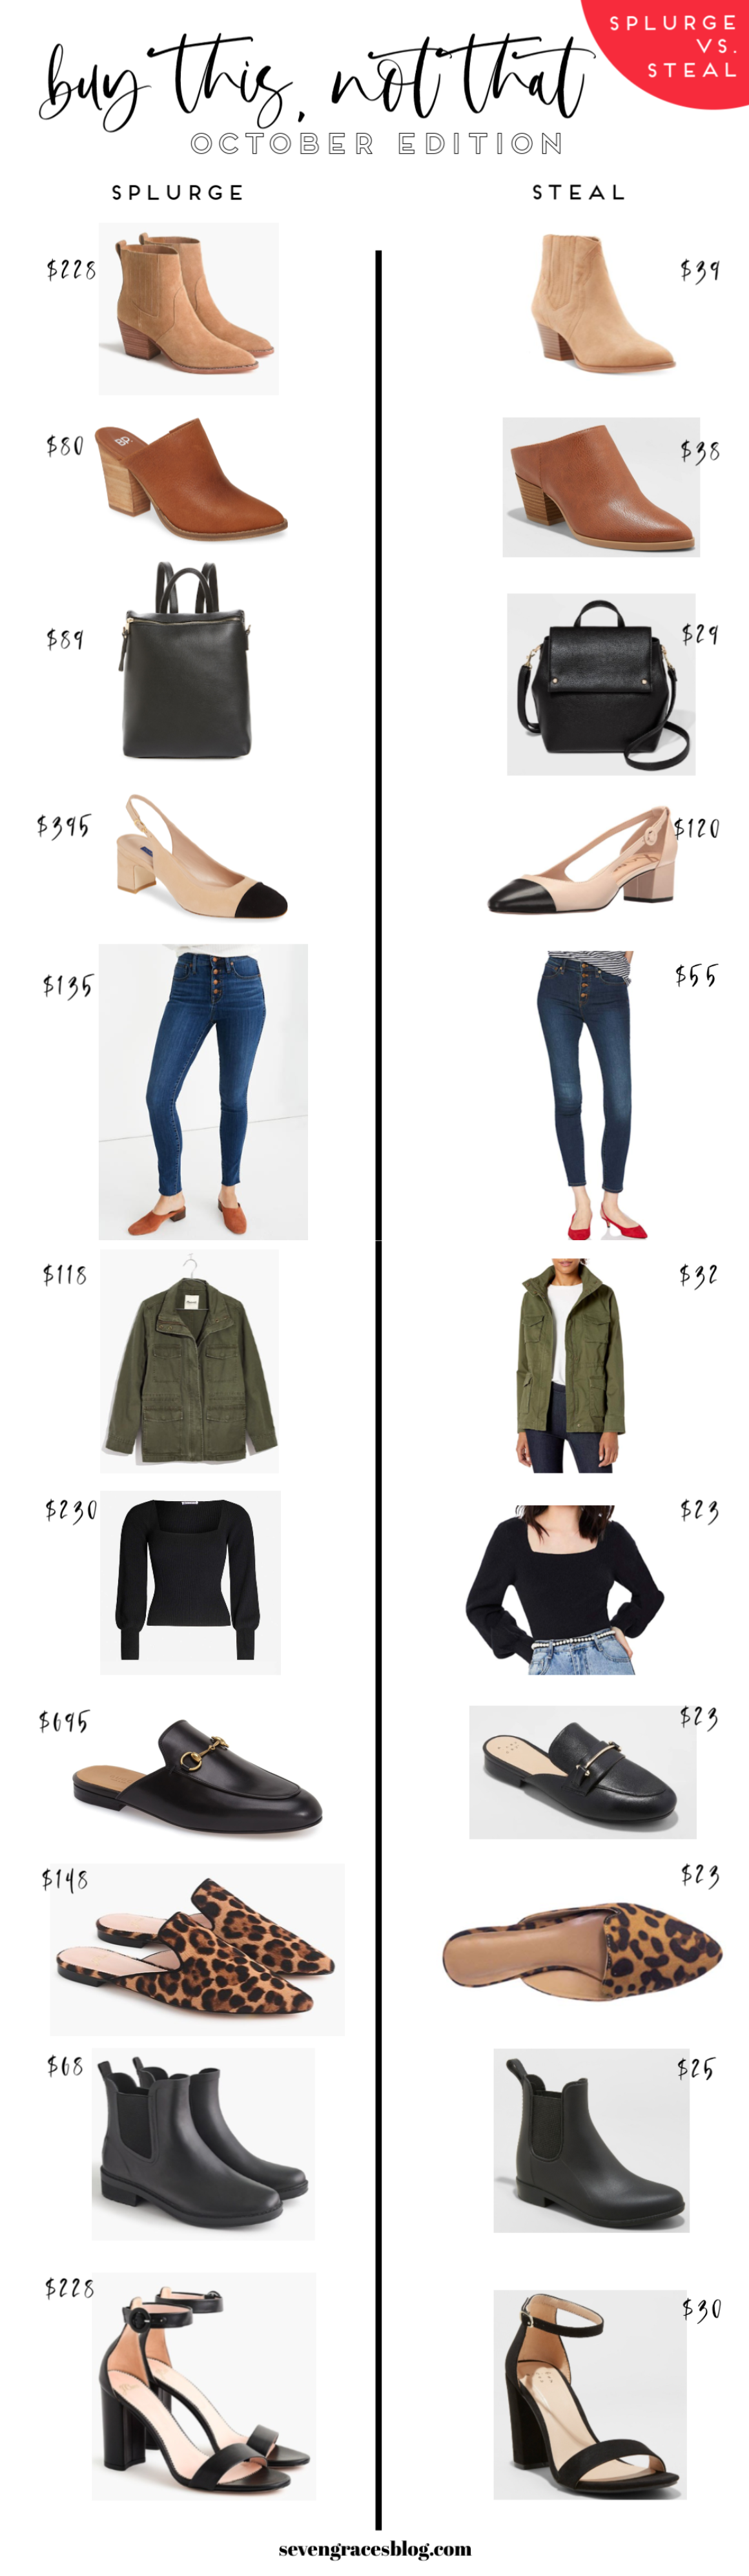 The best "buy this, not that" looks this fall! All the best booties, jeans, and jackets for a look for less! #fashionfinds #looksforless #buythisnotthat